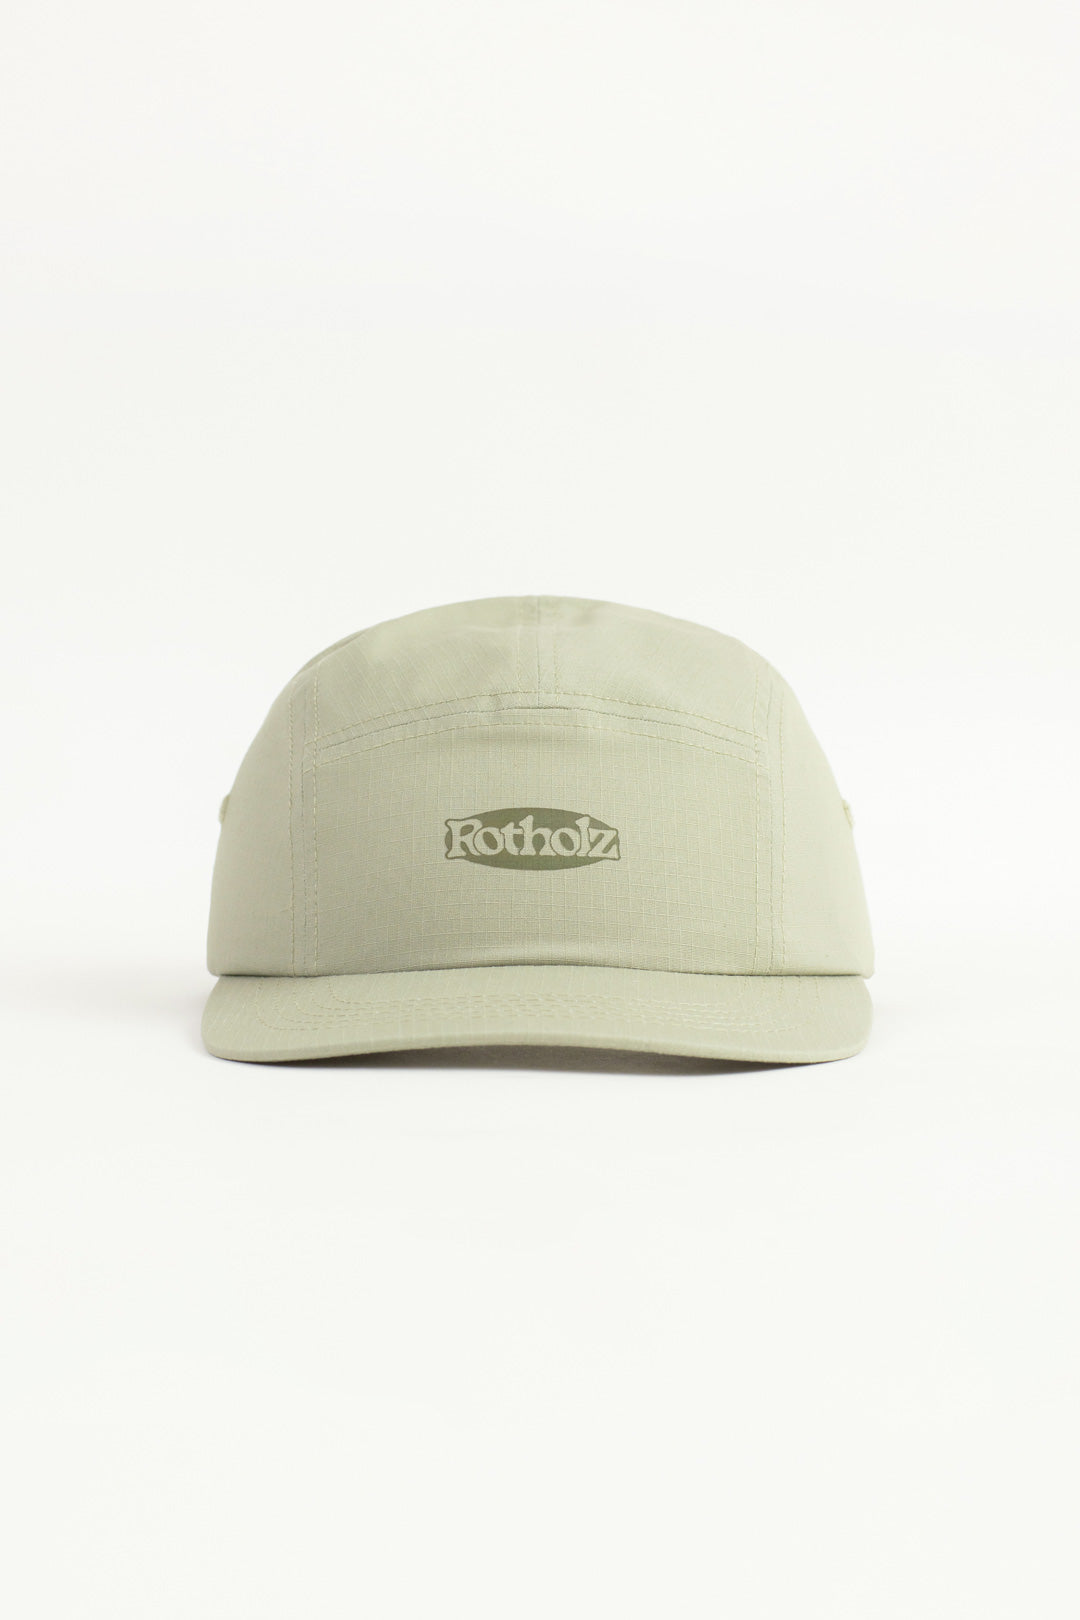 Green Cap Tech 5-Panel made of organic cotton by Rotholz